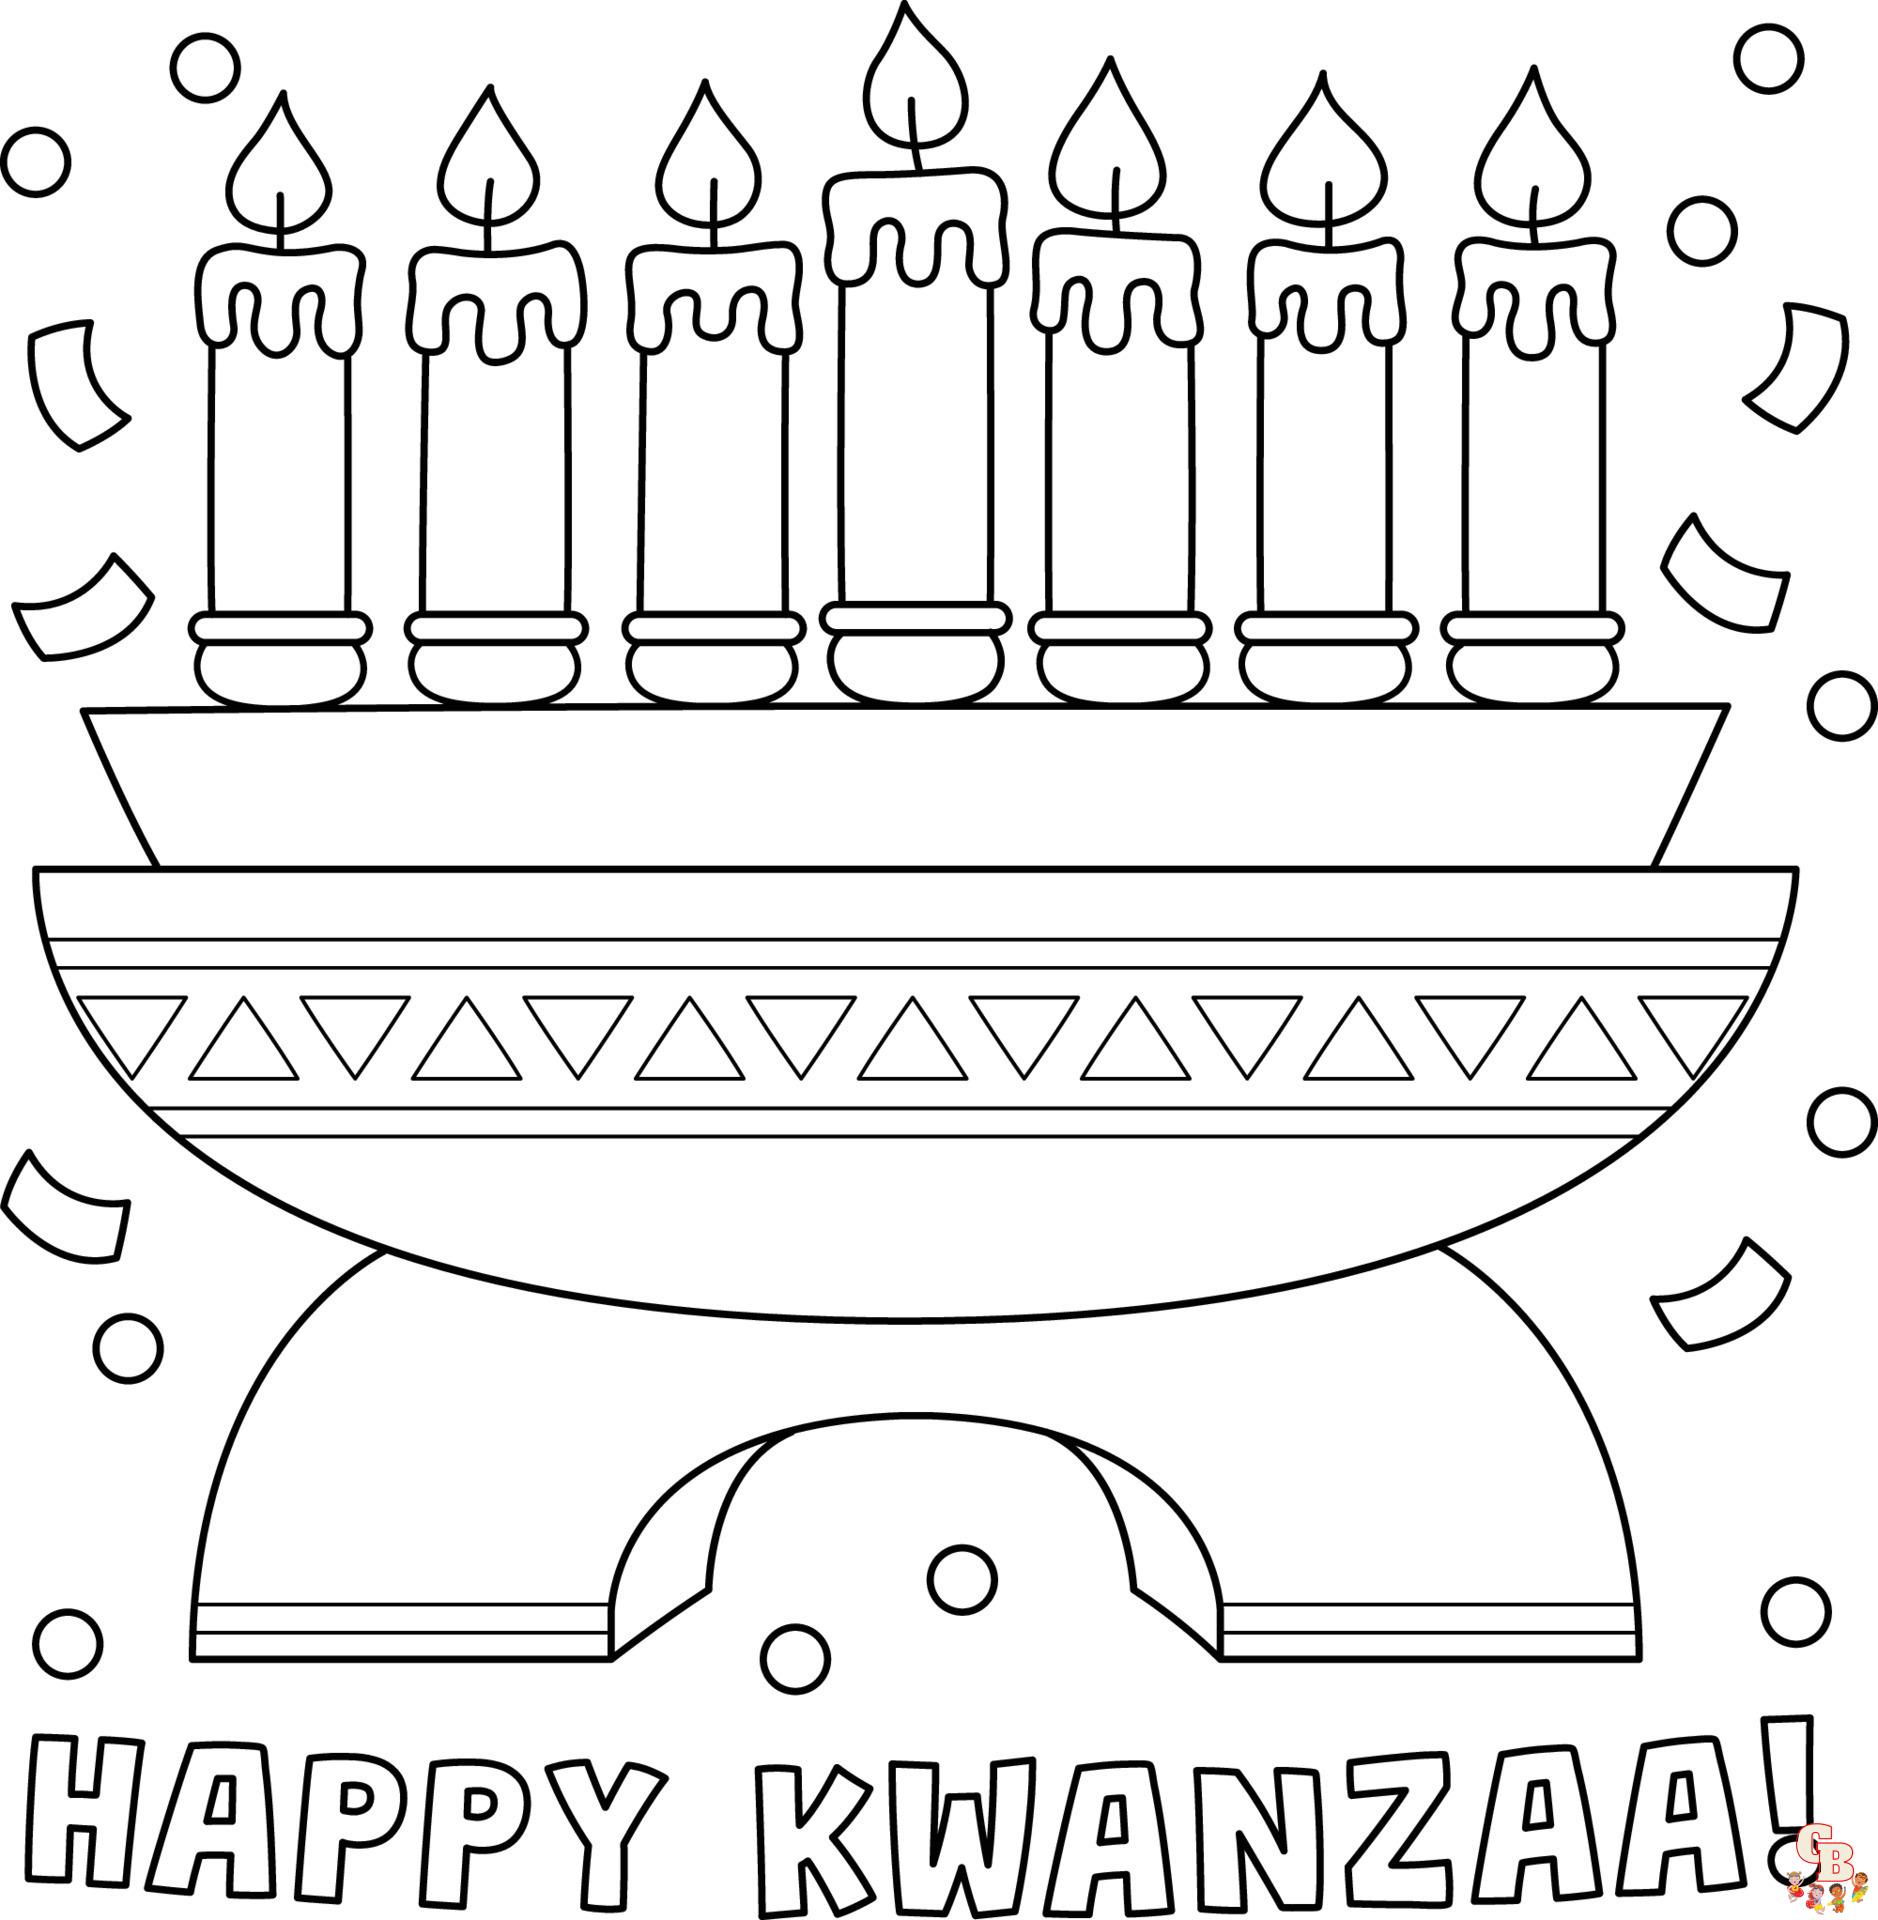 Celebrate kwanzaa with fun and free kwanzaa coloring pages